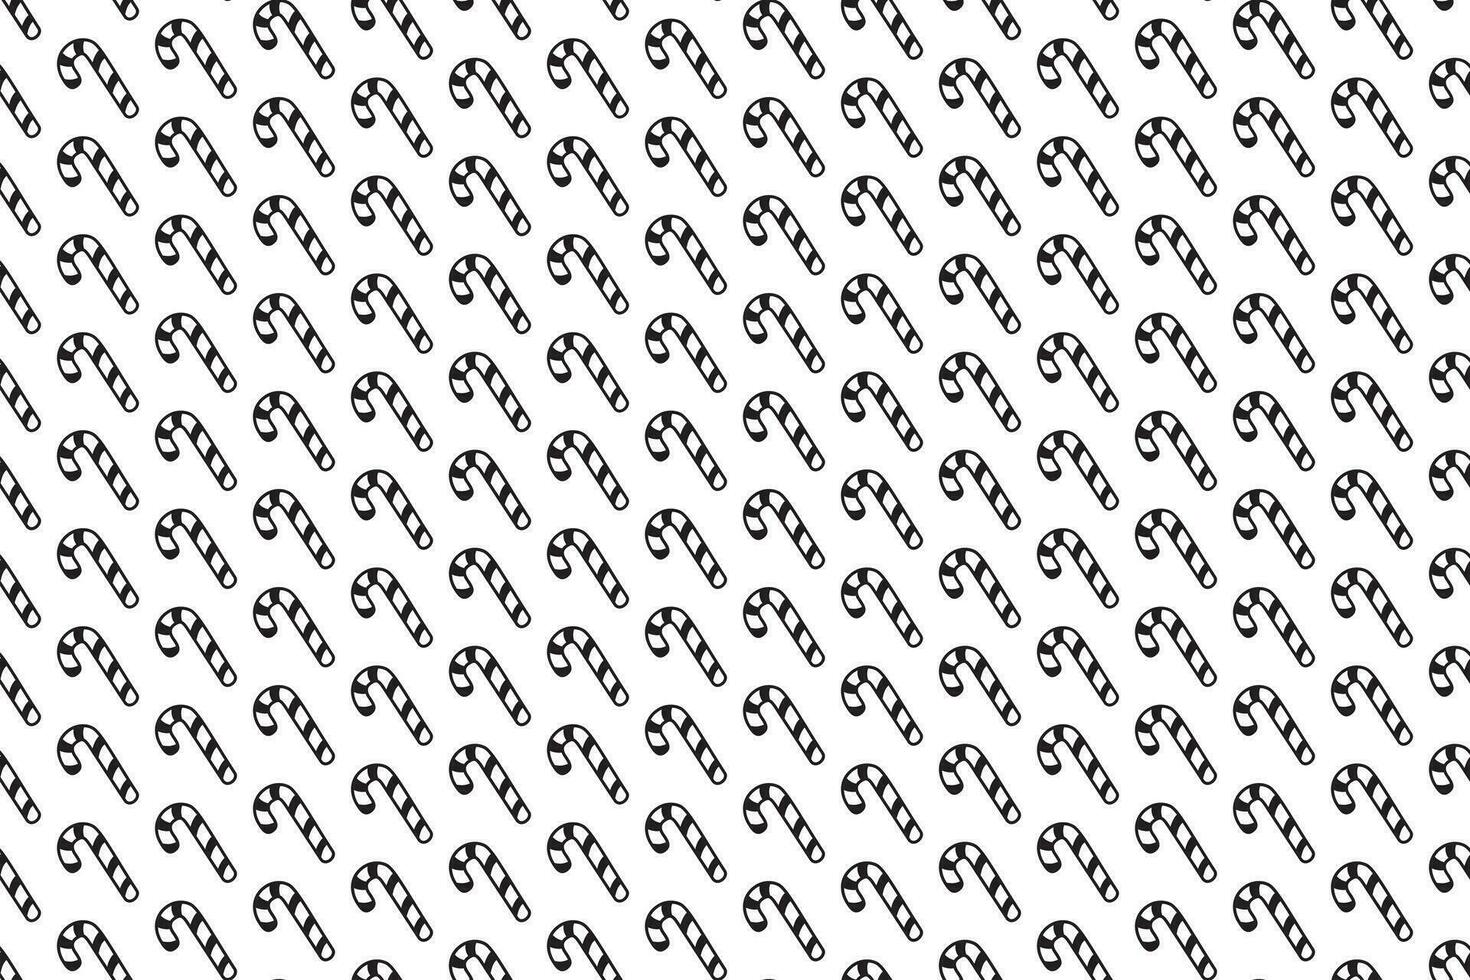 Black Candy Cane Seamless Pattern background on white. Perfect for gift wraps, wrapping paper, prints, backdrops. Vector Illustration. EPS 10.